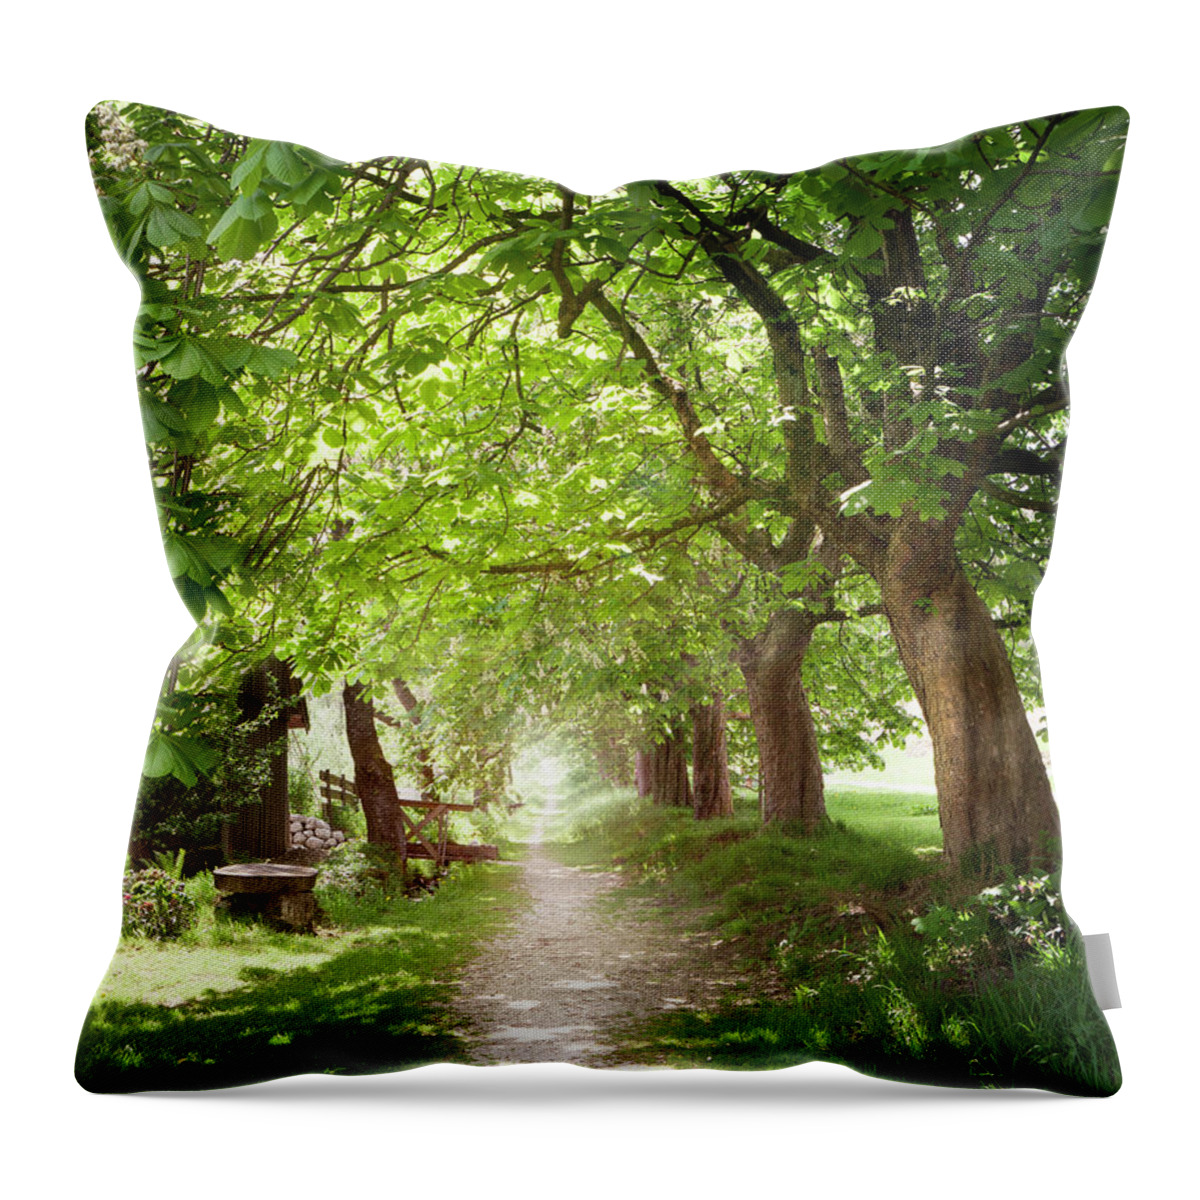 Avenue Throw Pillow featuring the photograph Walking Under Chestnut Trees In by Lorenzo104